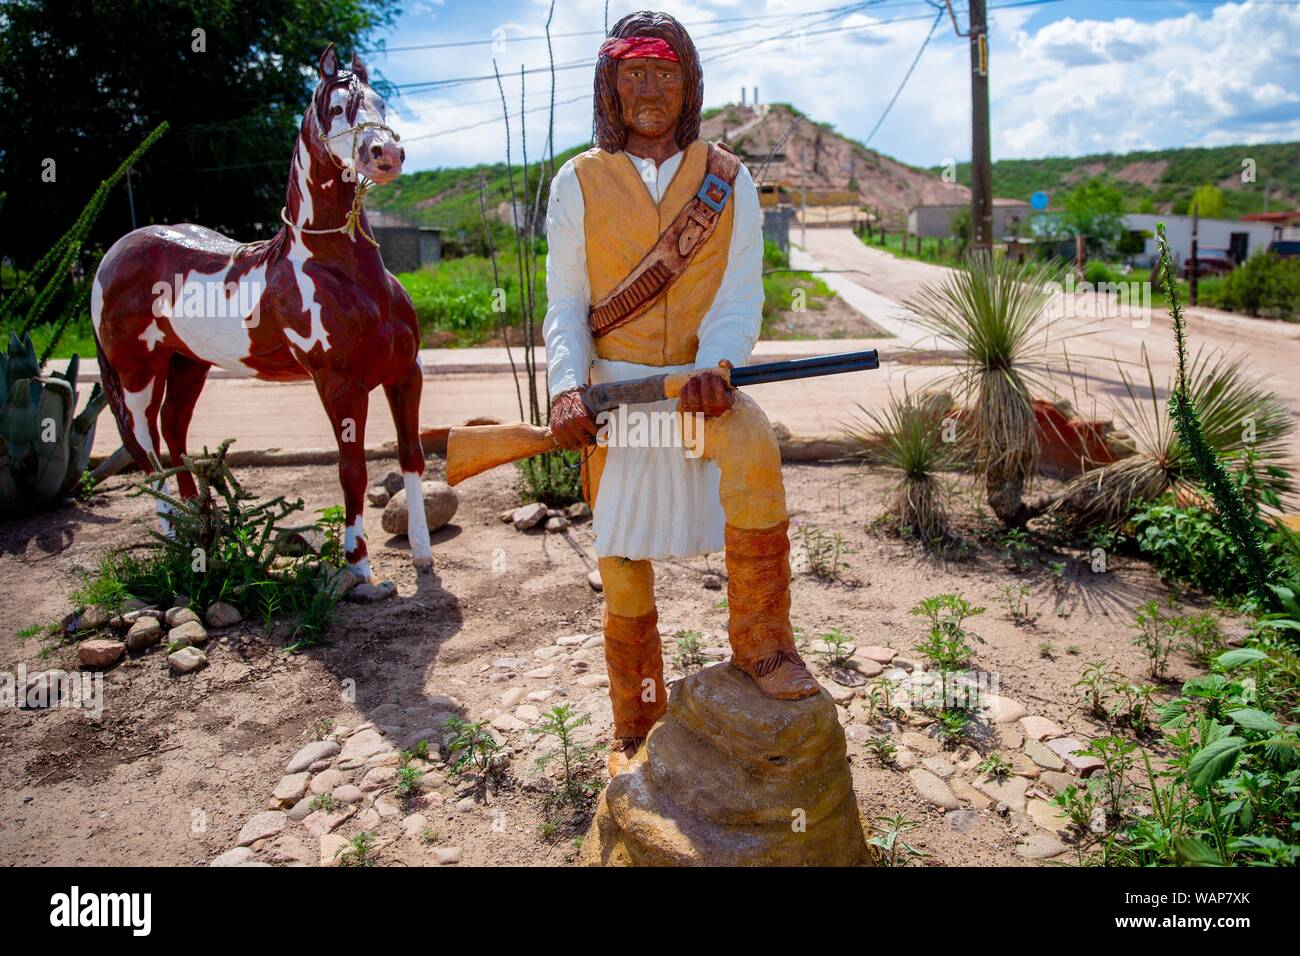 Monument, statue of the Indian Geronimo in the town of Fronteras, Sonora, Mexico. Goyale Geronimo was a prominent military chief of the Bendoke Apaches. Between 1858 and 1886 he fought against the Mexican and American armies throughout the northern territory of Mexico. National Geronimo in Arizpe, Sonora. In the Dungeon located in Fronteras, Sonora. There the most brave and famous of the Apaches was imprisoned. (Photo: LuisGutierrez / NortePhoto.com)  Monumento, estatua de el indio Geronimo en el pueblo de Fronteras, Sonora, Mexico. Goyale. Geronimo fue un destacado jefe militar de los apaches Stock Photo